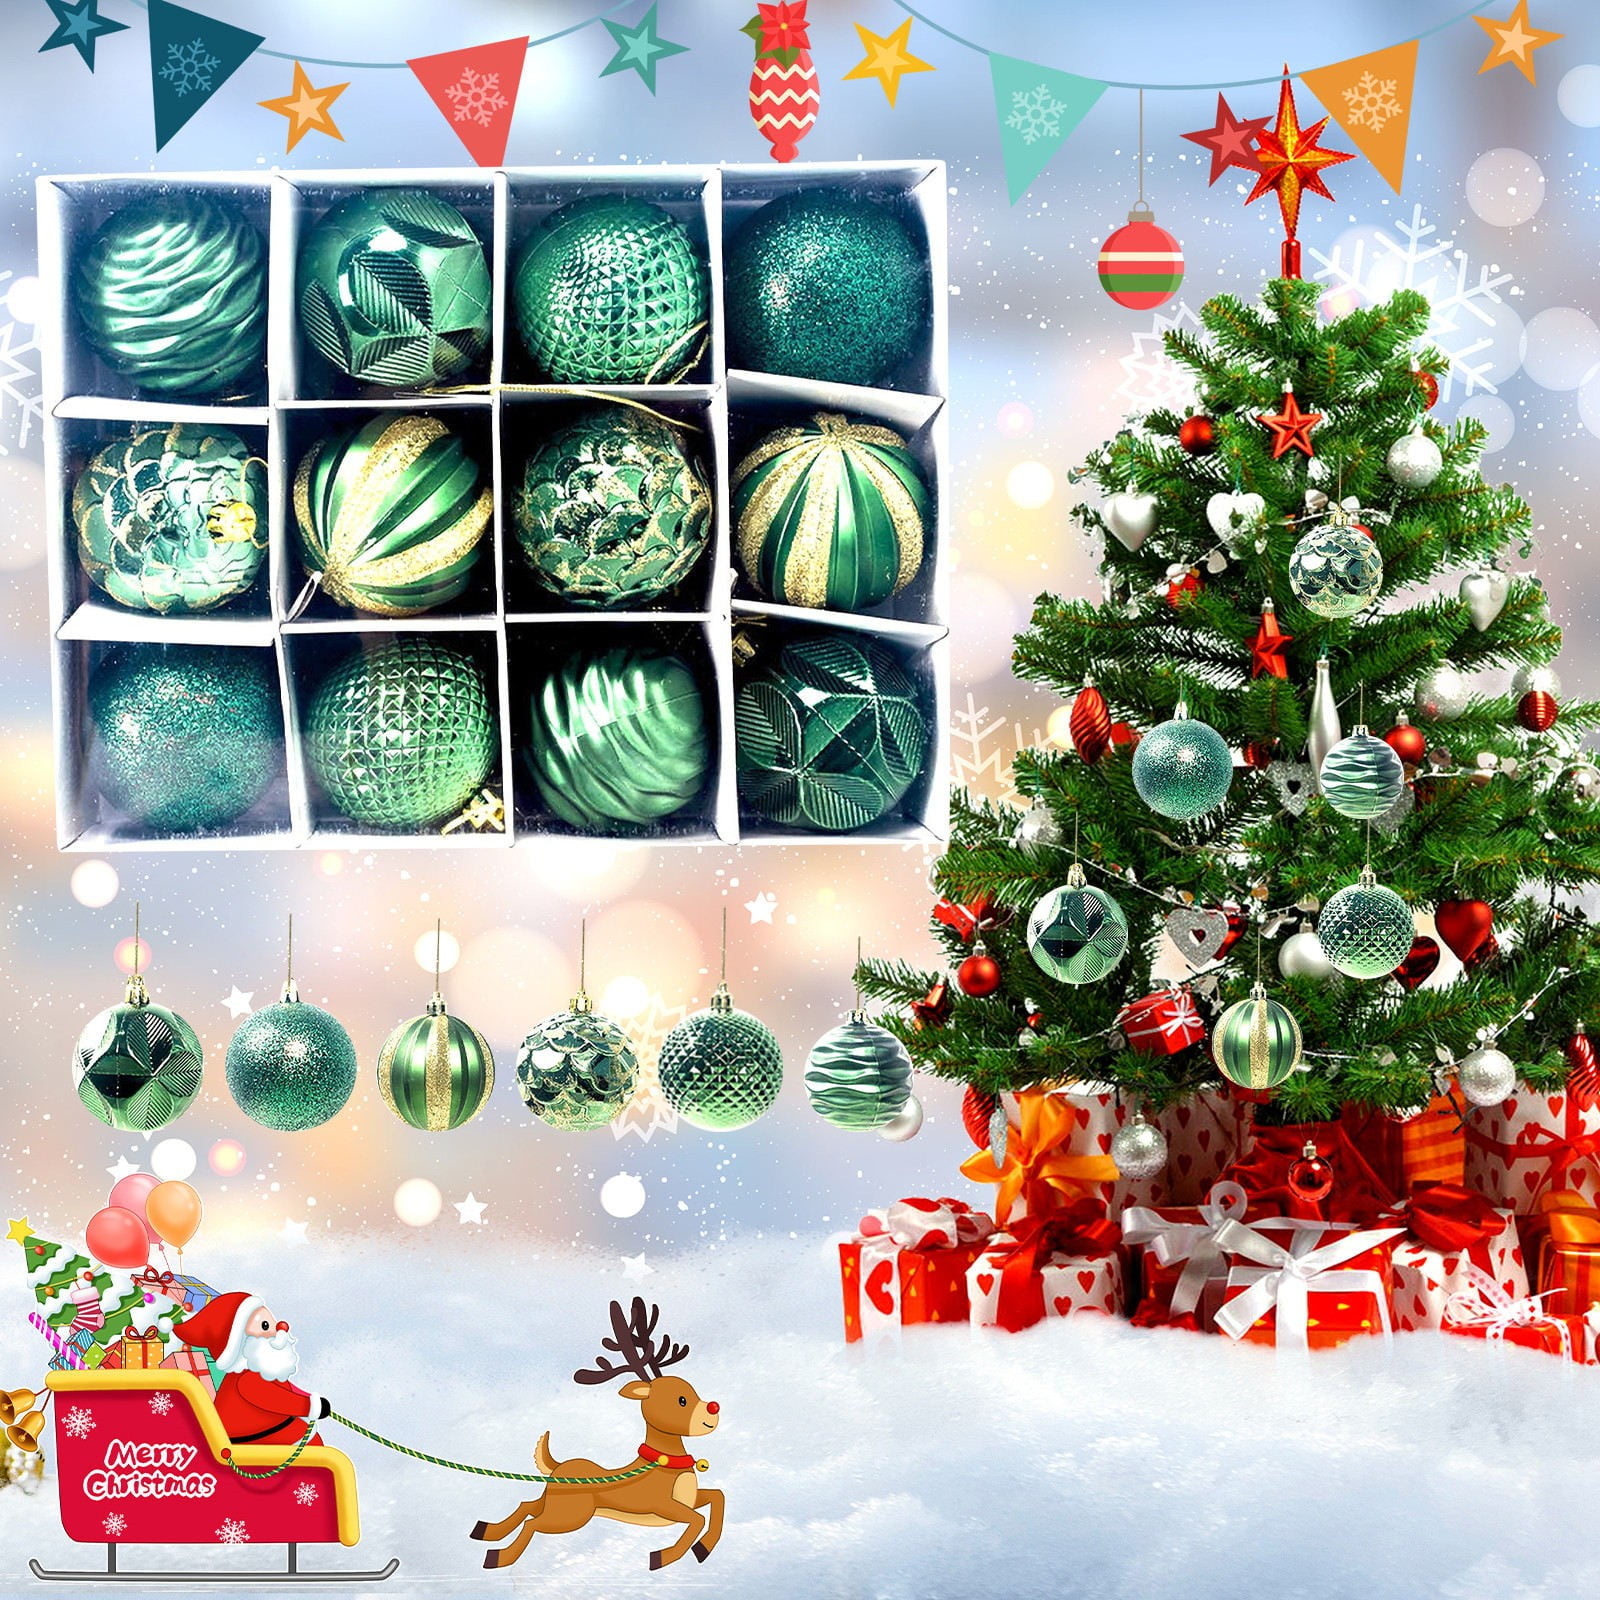 Details about   New Year Decor Christmas Trees Baubles Fabric Shower Curtain Set Bathroom Decor 